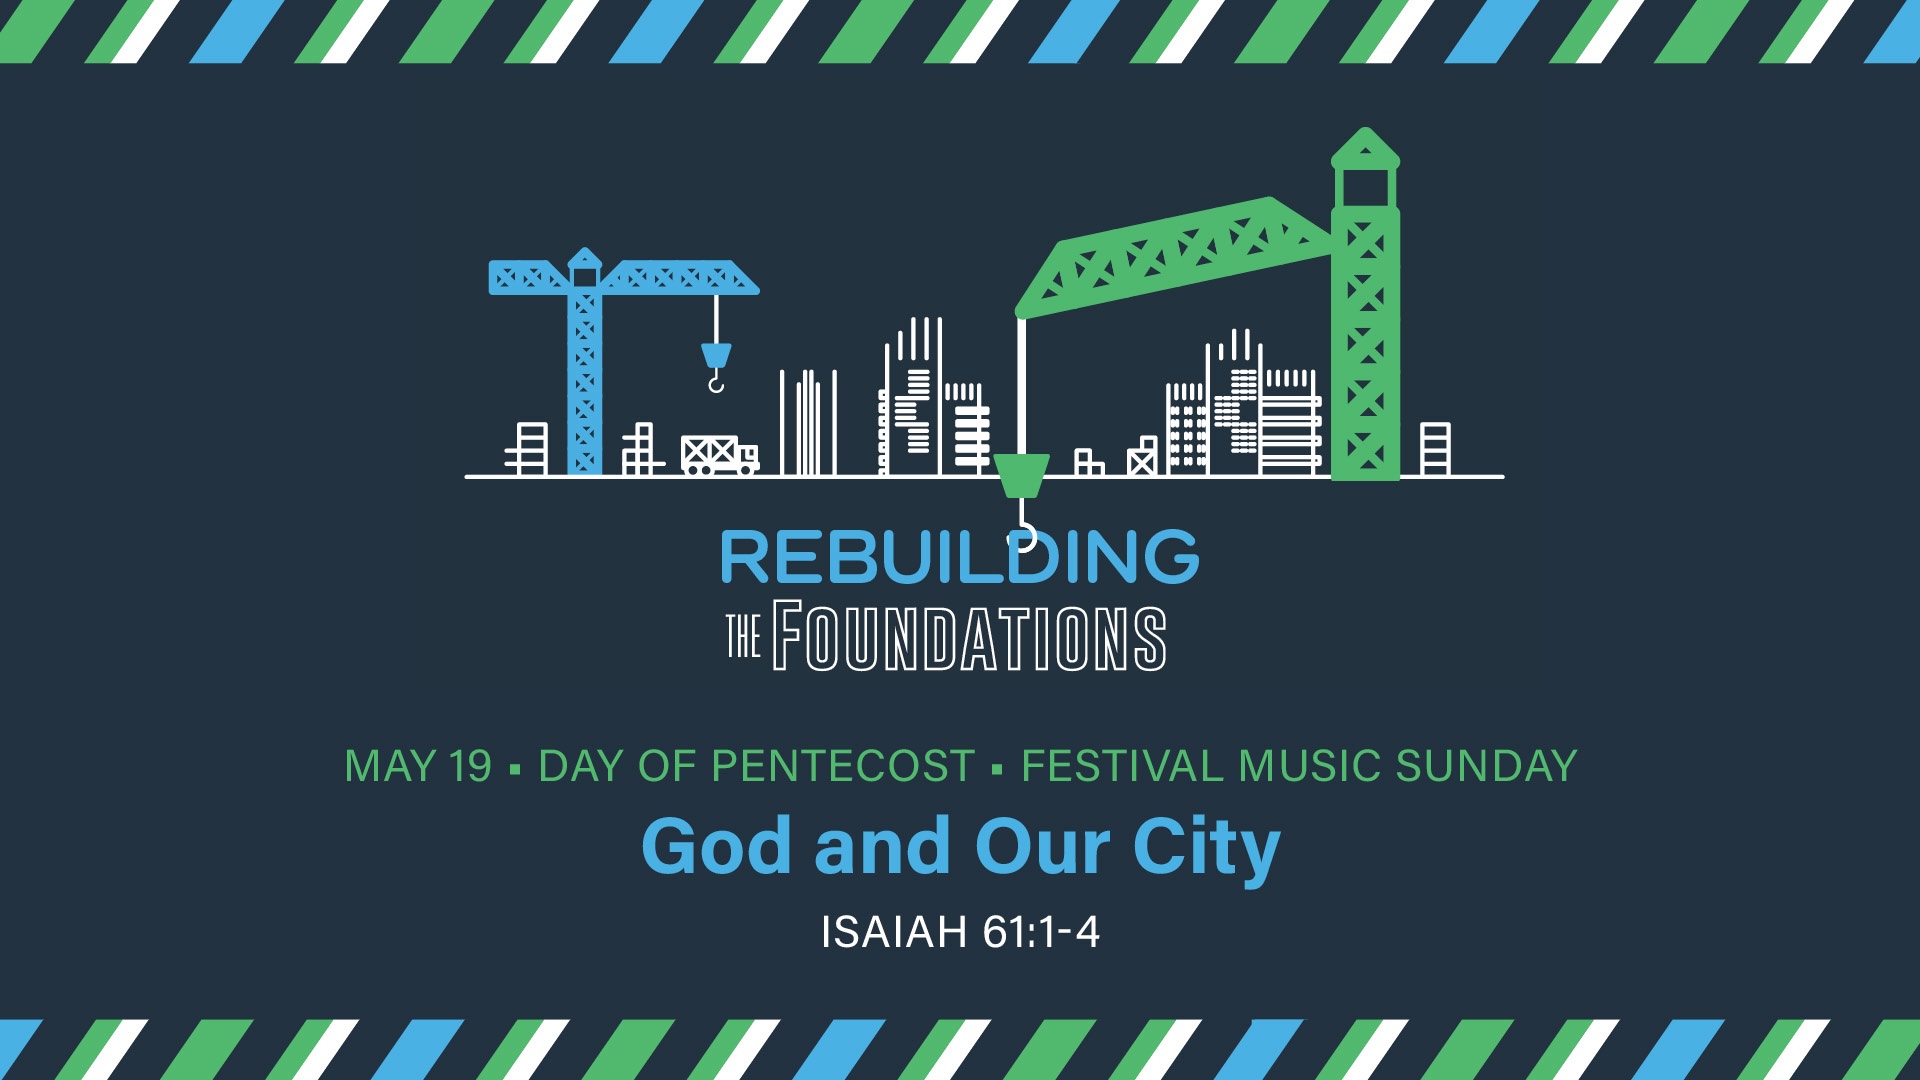 May 19 - Rebuilding the Foundations: God and Our City